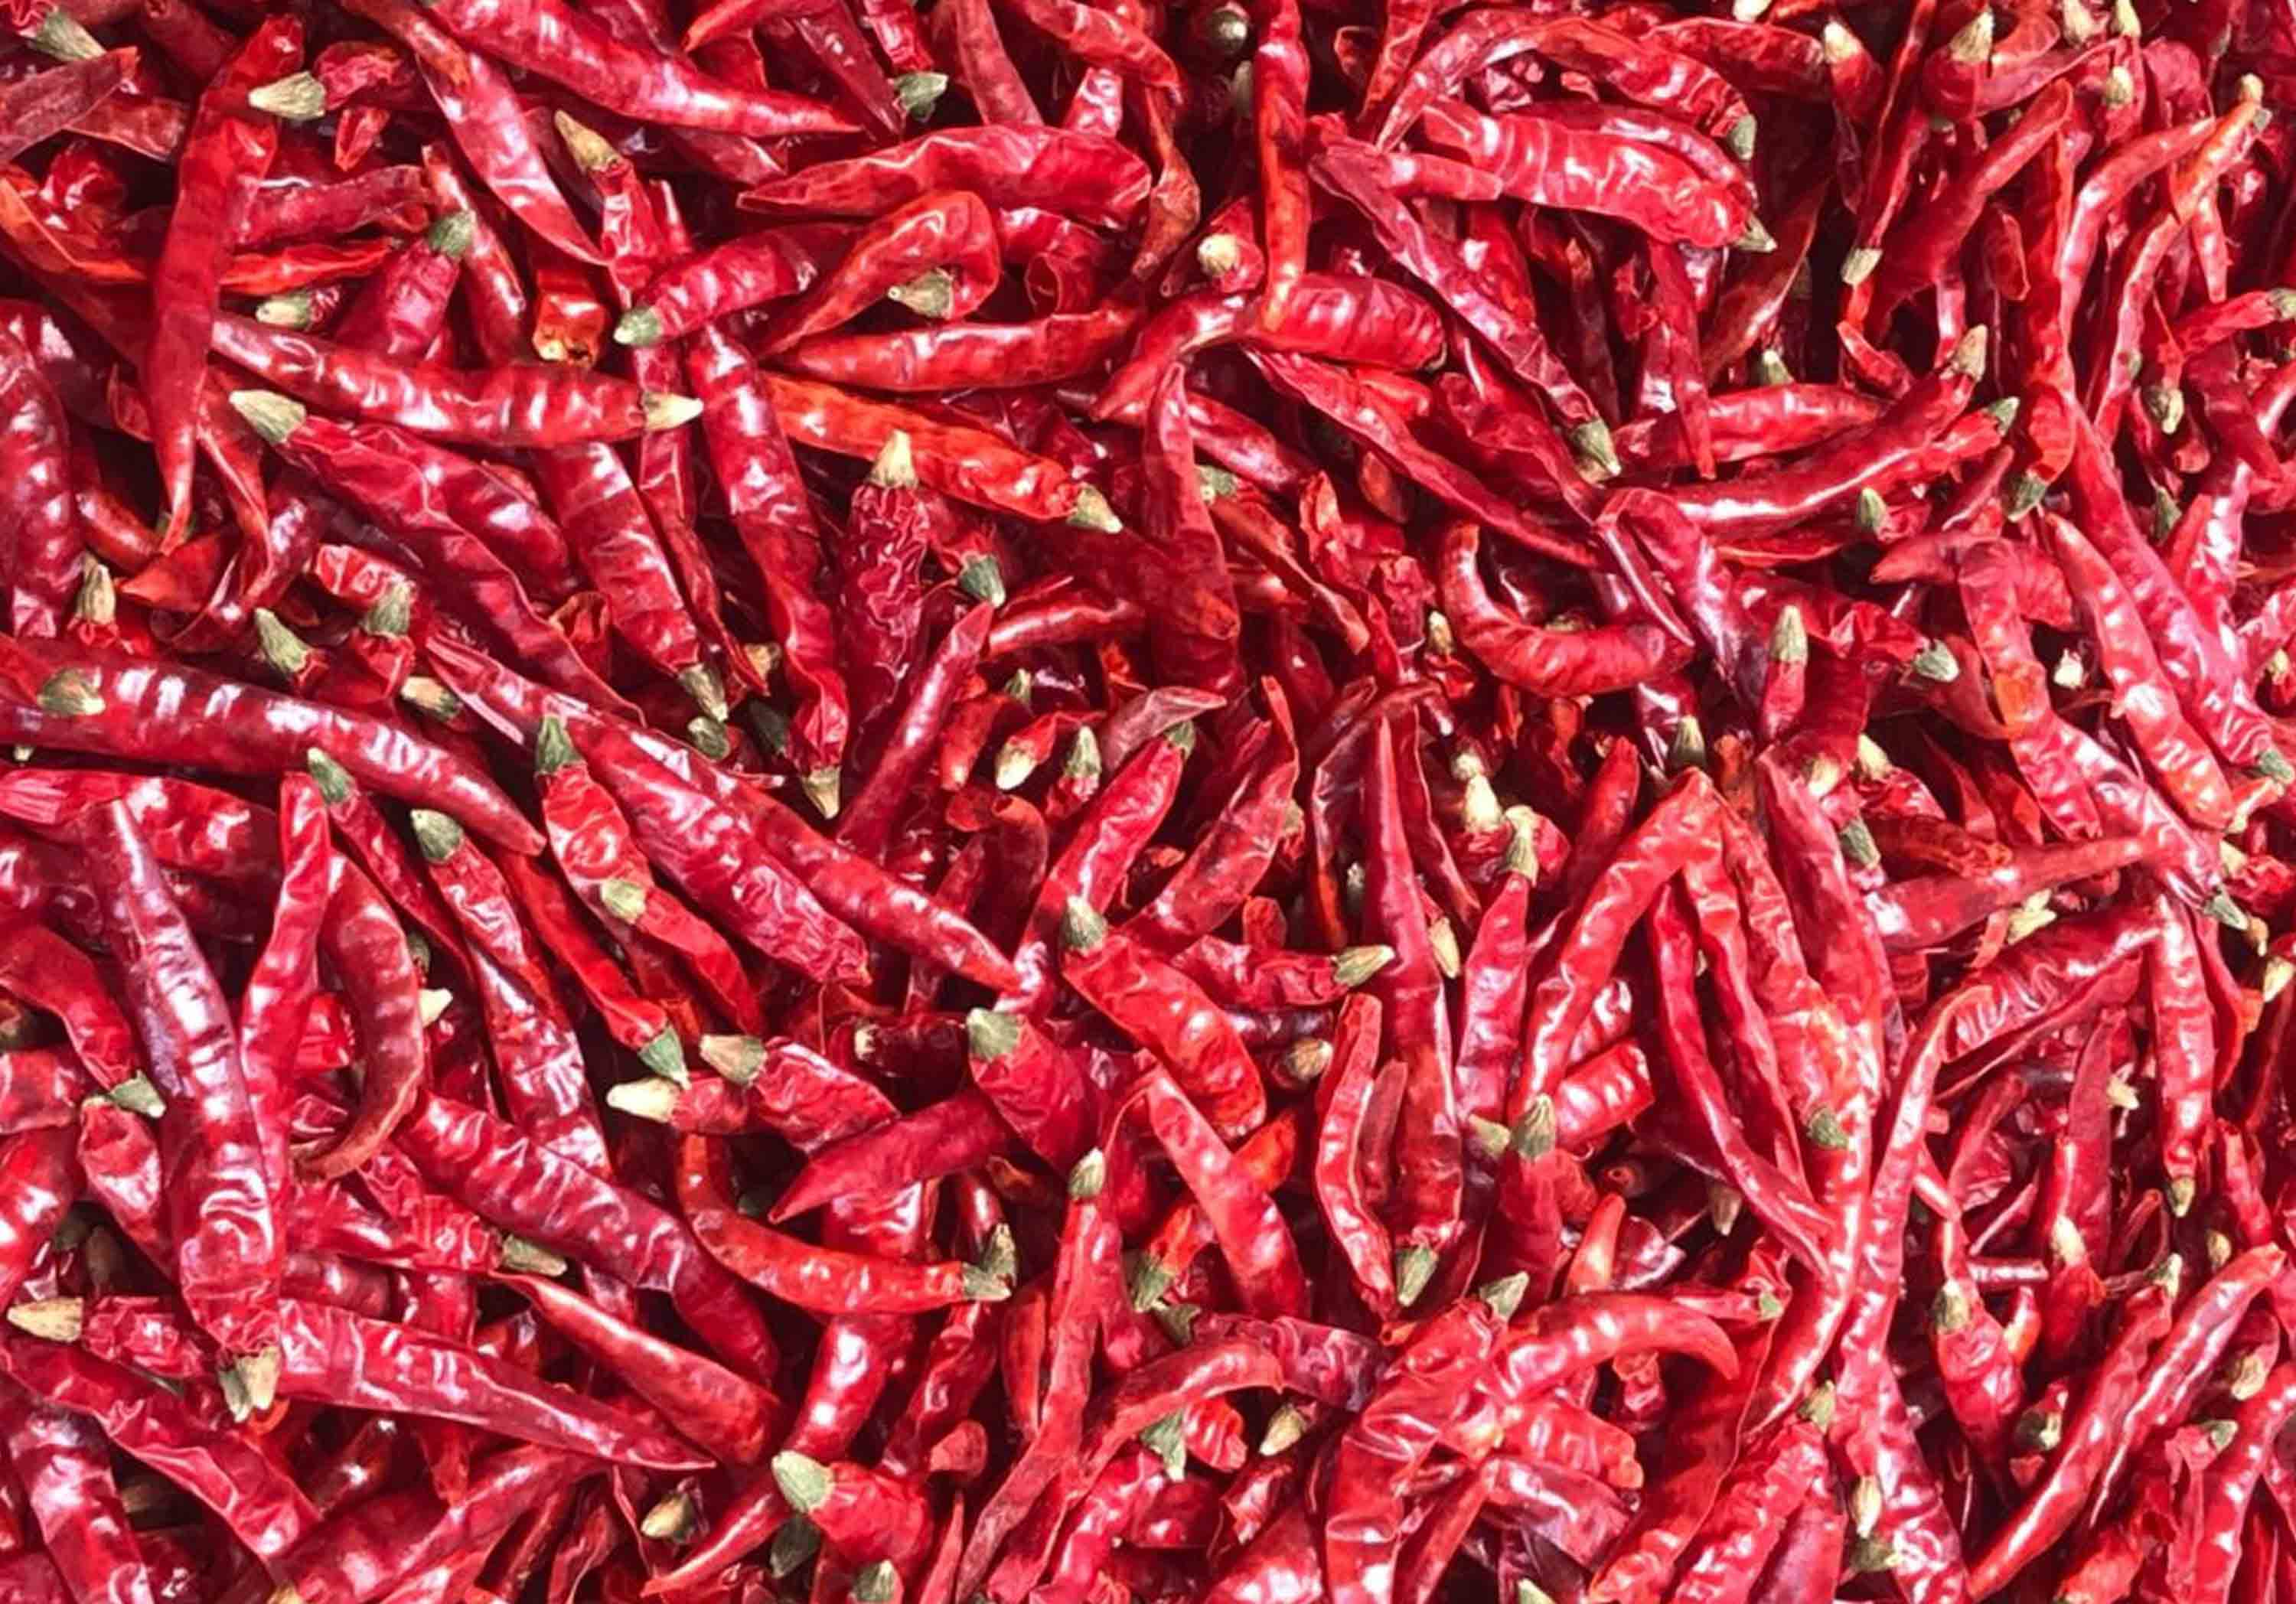 S-17 Teja Dried Red Chilli Suppliers in India